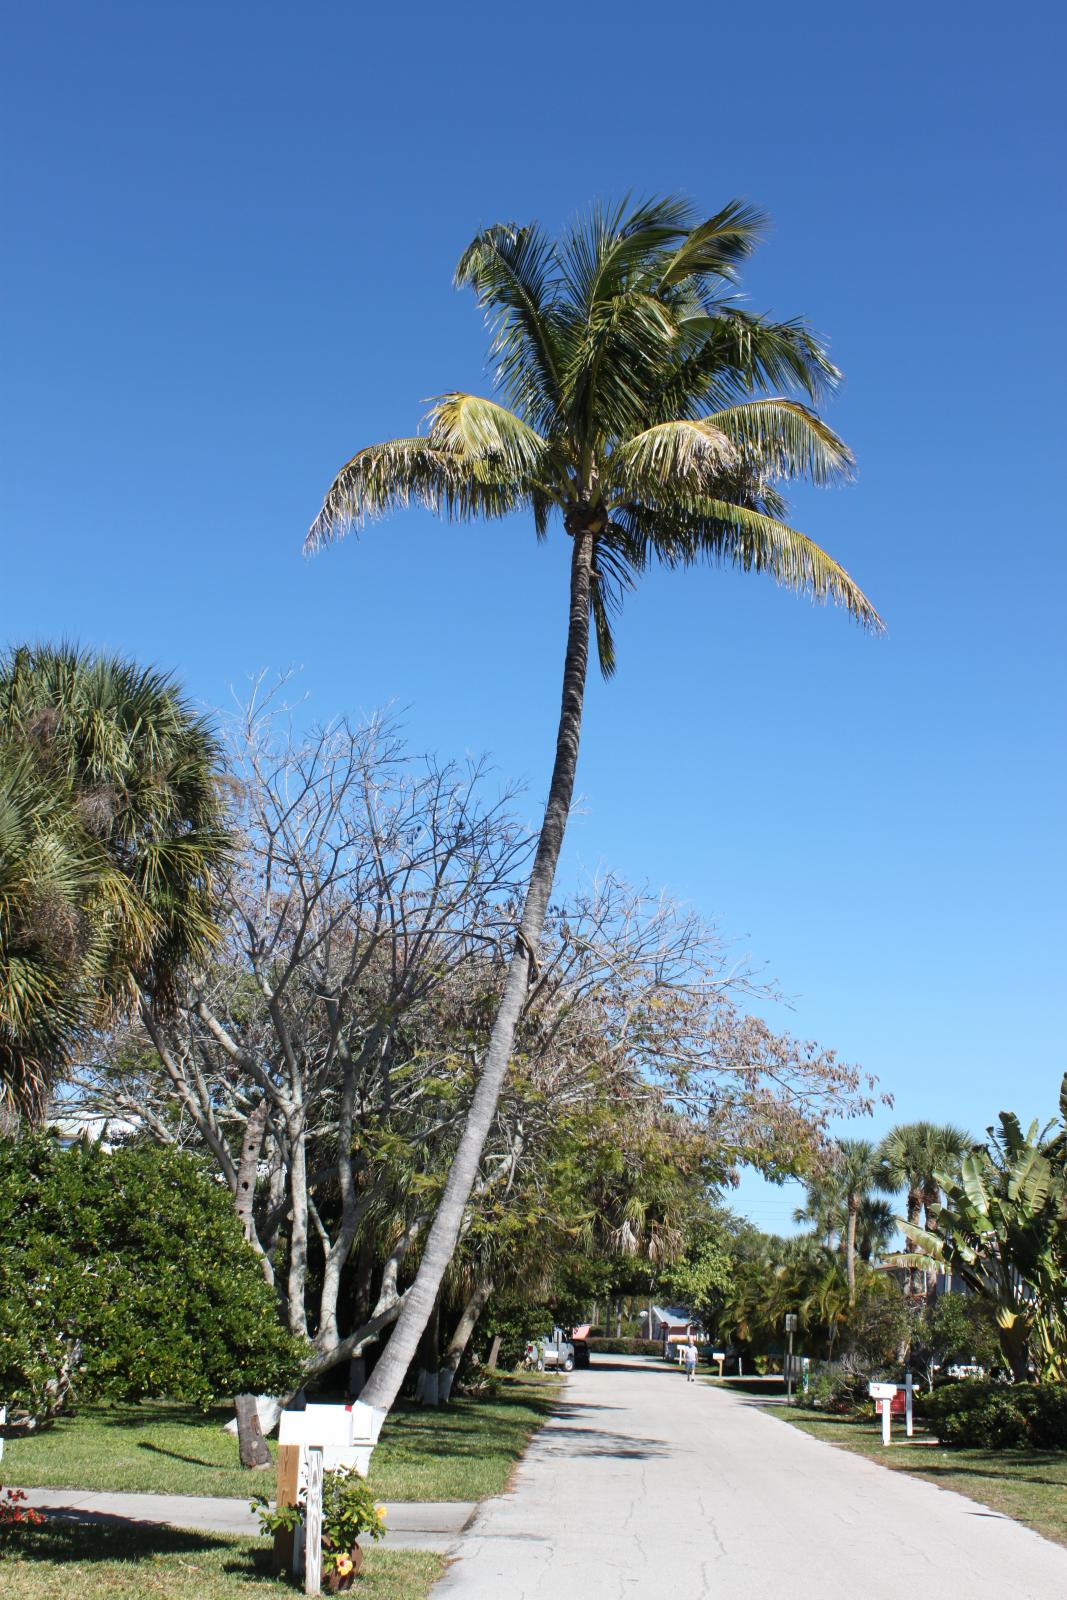 Newport Coconut Is Dying Discussing Palm Trees Worldwide Palmtalk